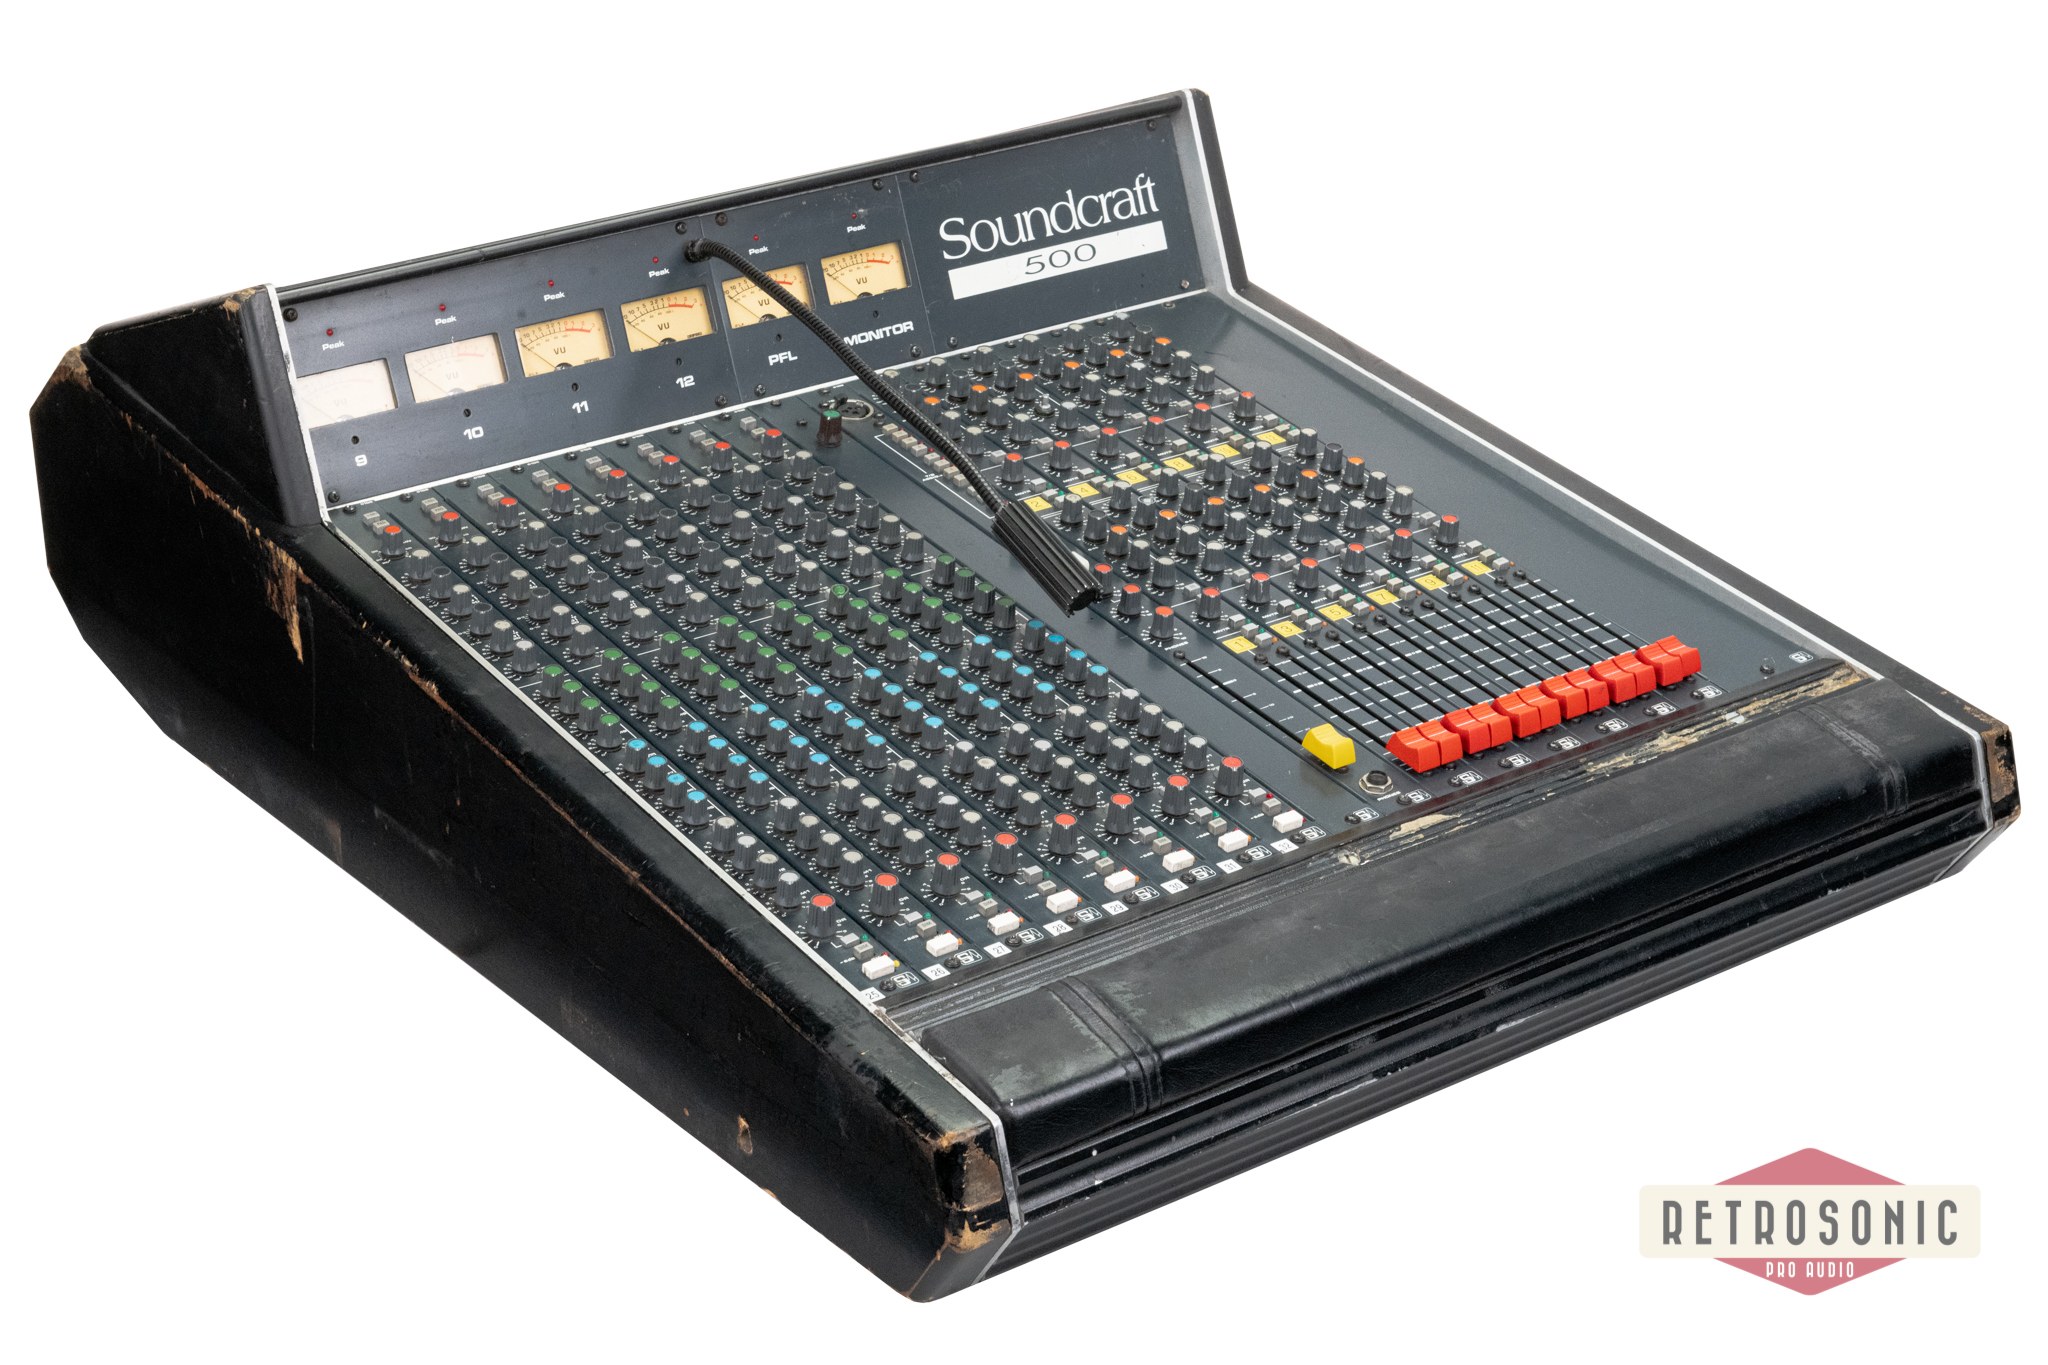 Soundcraft Series 500M 8-Channel Sidecar with Summing and PSU